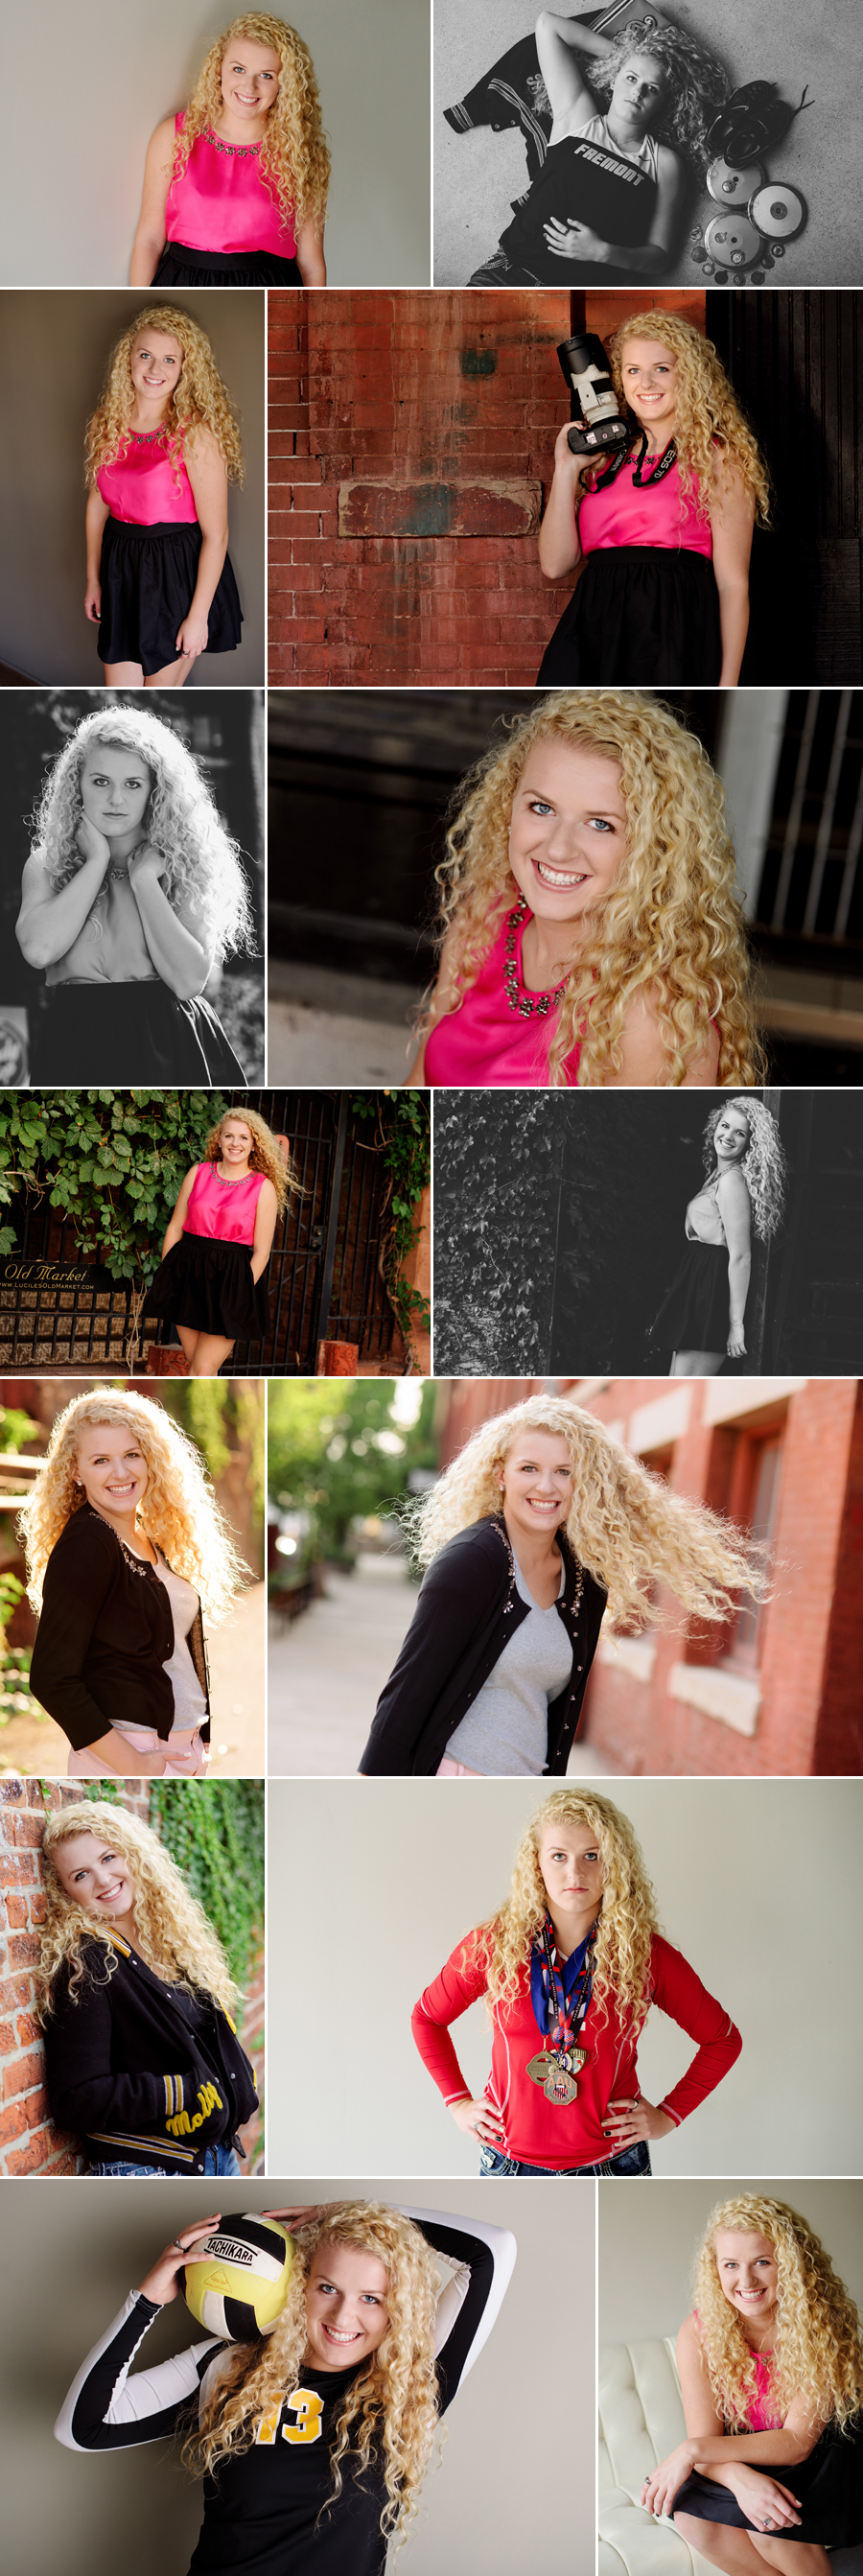 molly | class of 2015 | Fremont High School